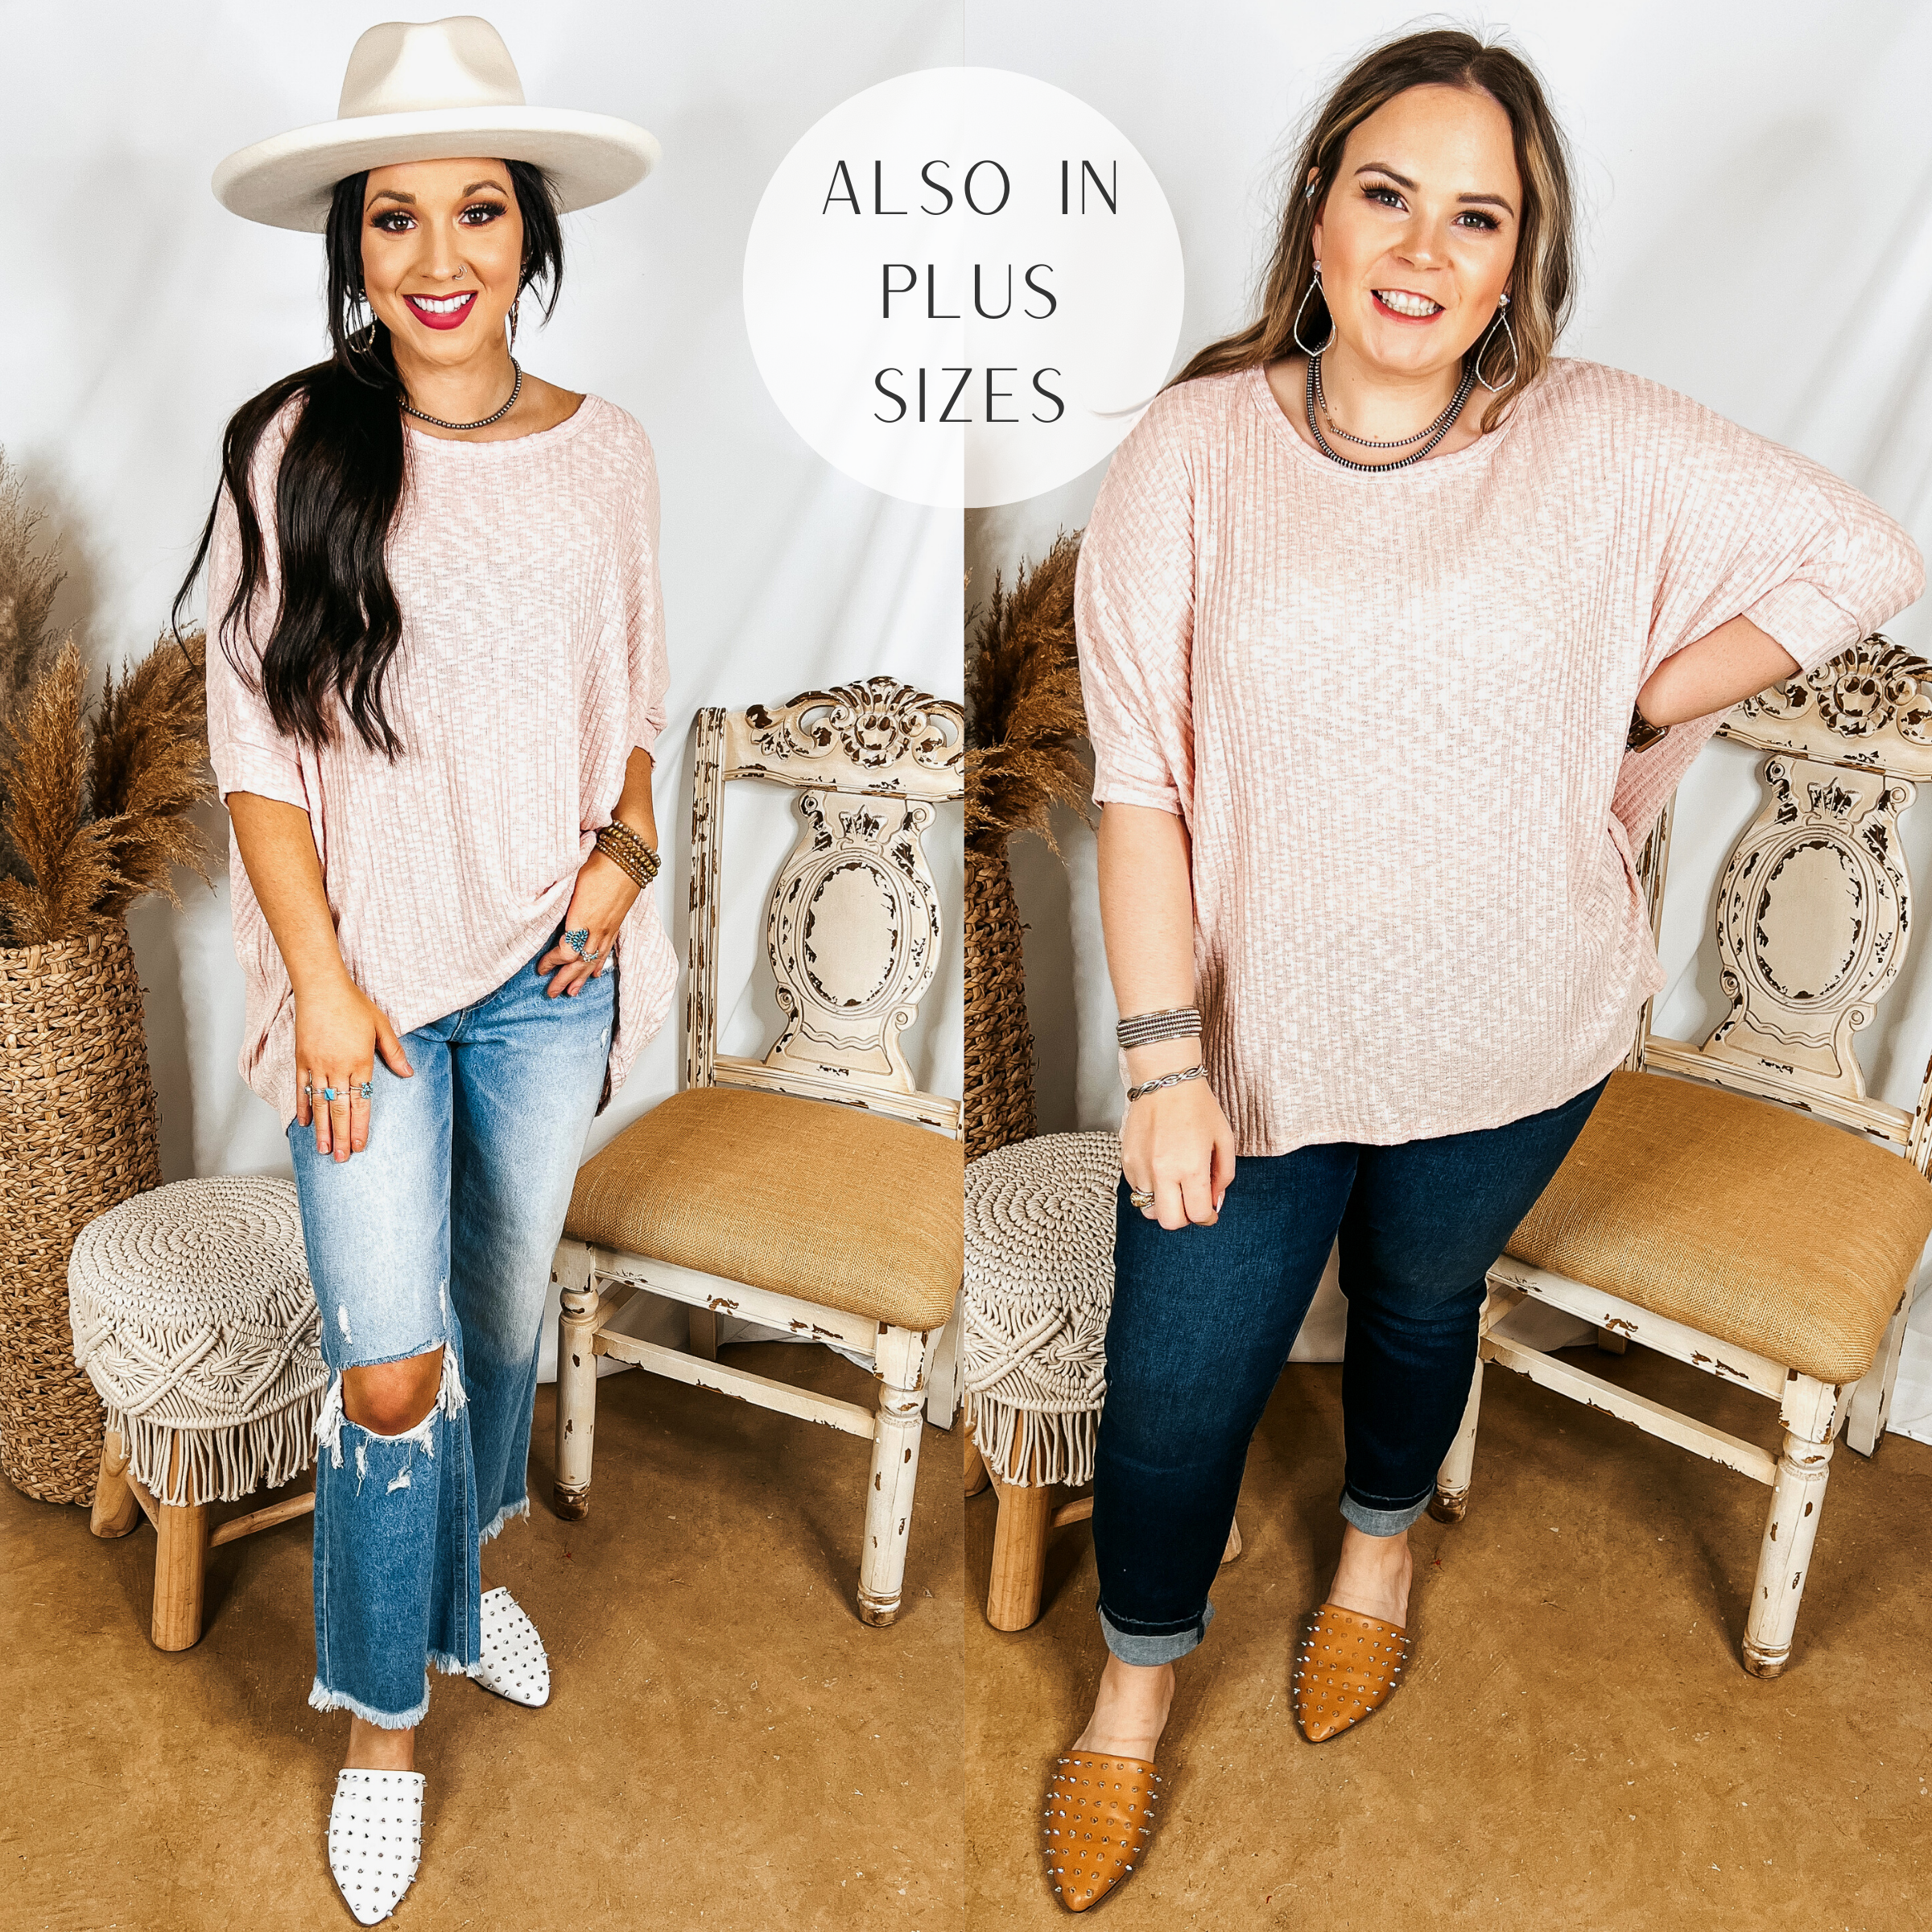 Models are wearing a blush pink poncho top that has short sleeves. Size small model has it paired with cropped distressed jeans, white mules, and an ivory hat. Size large model has it paired with dark wash jeans, tan mules, and silver jewelry.